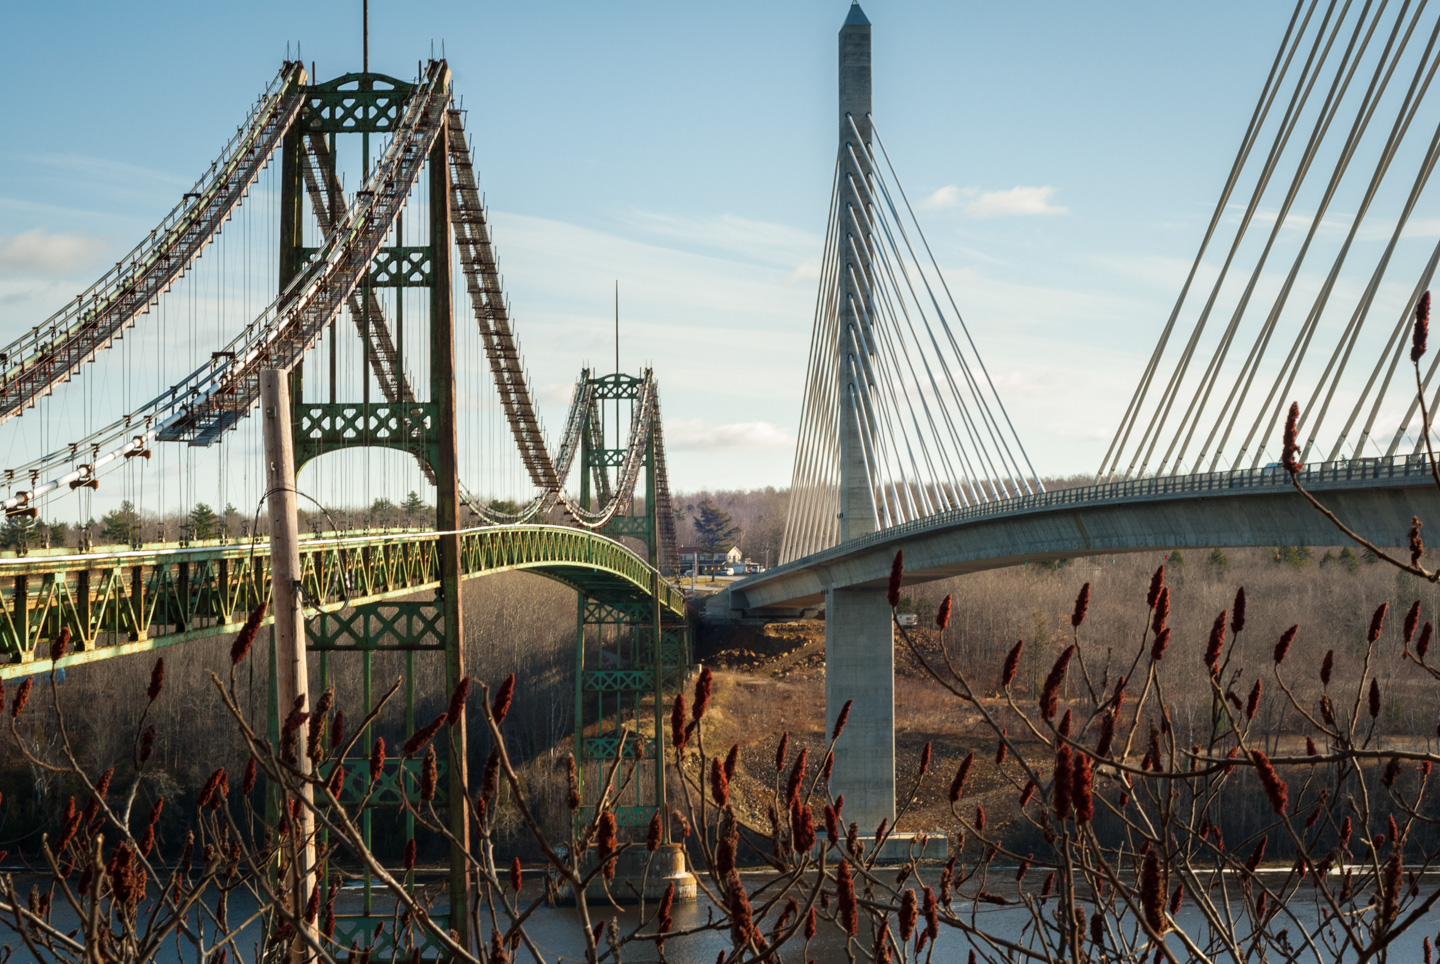 Old and new bridge over the Penobscot River